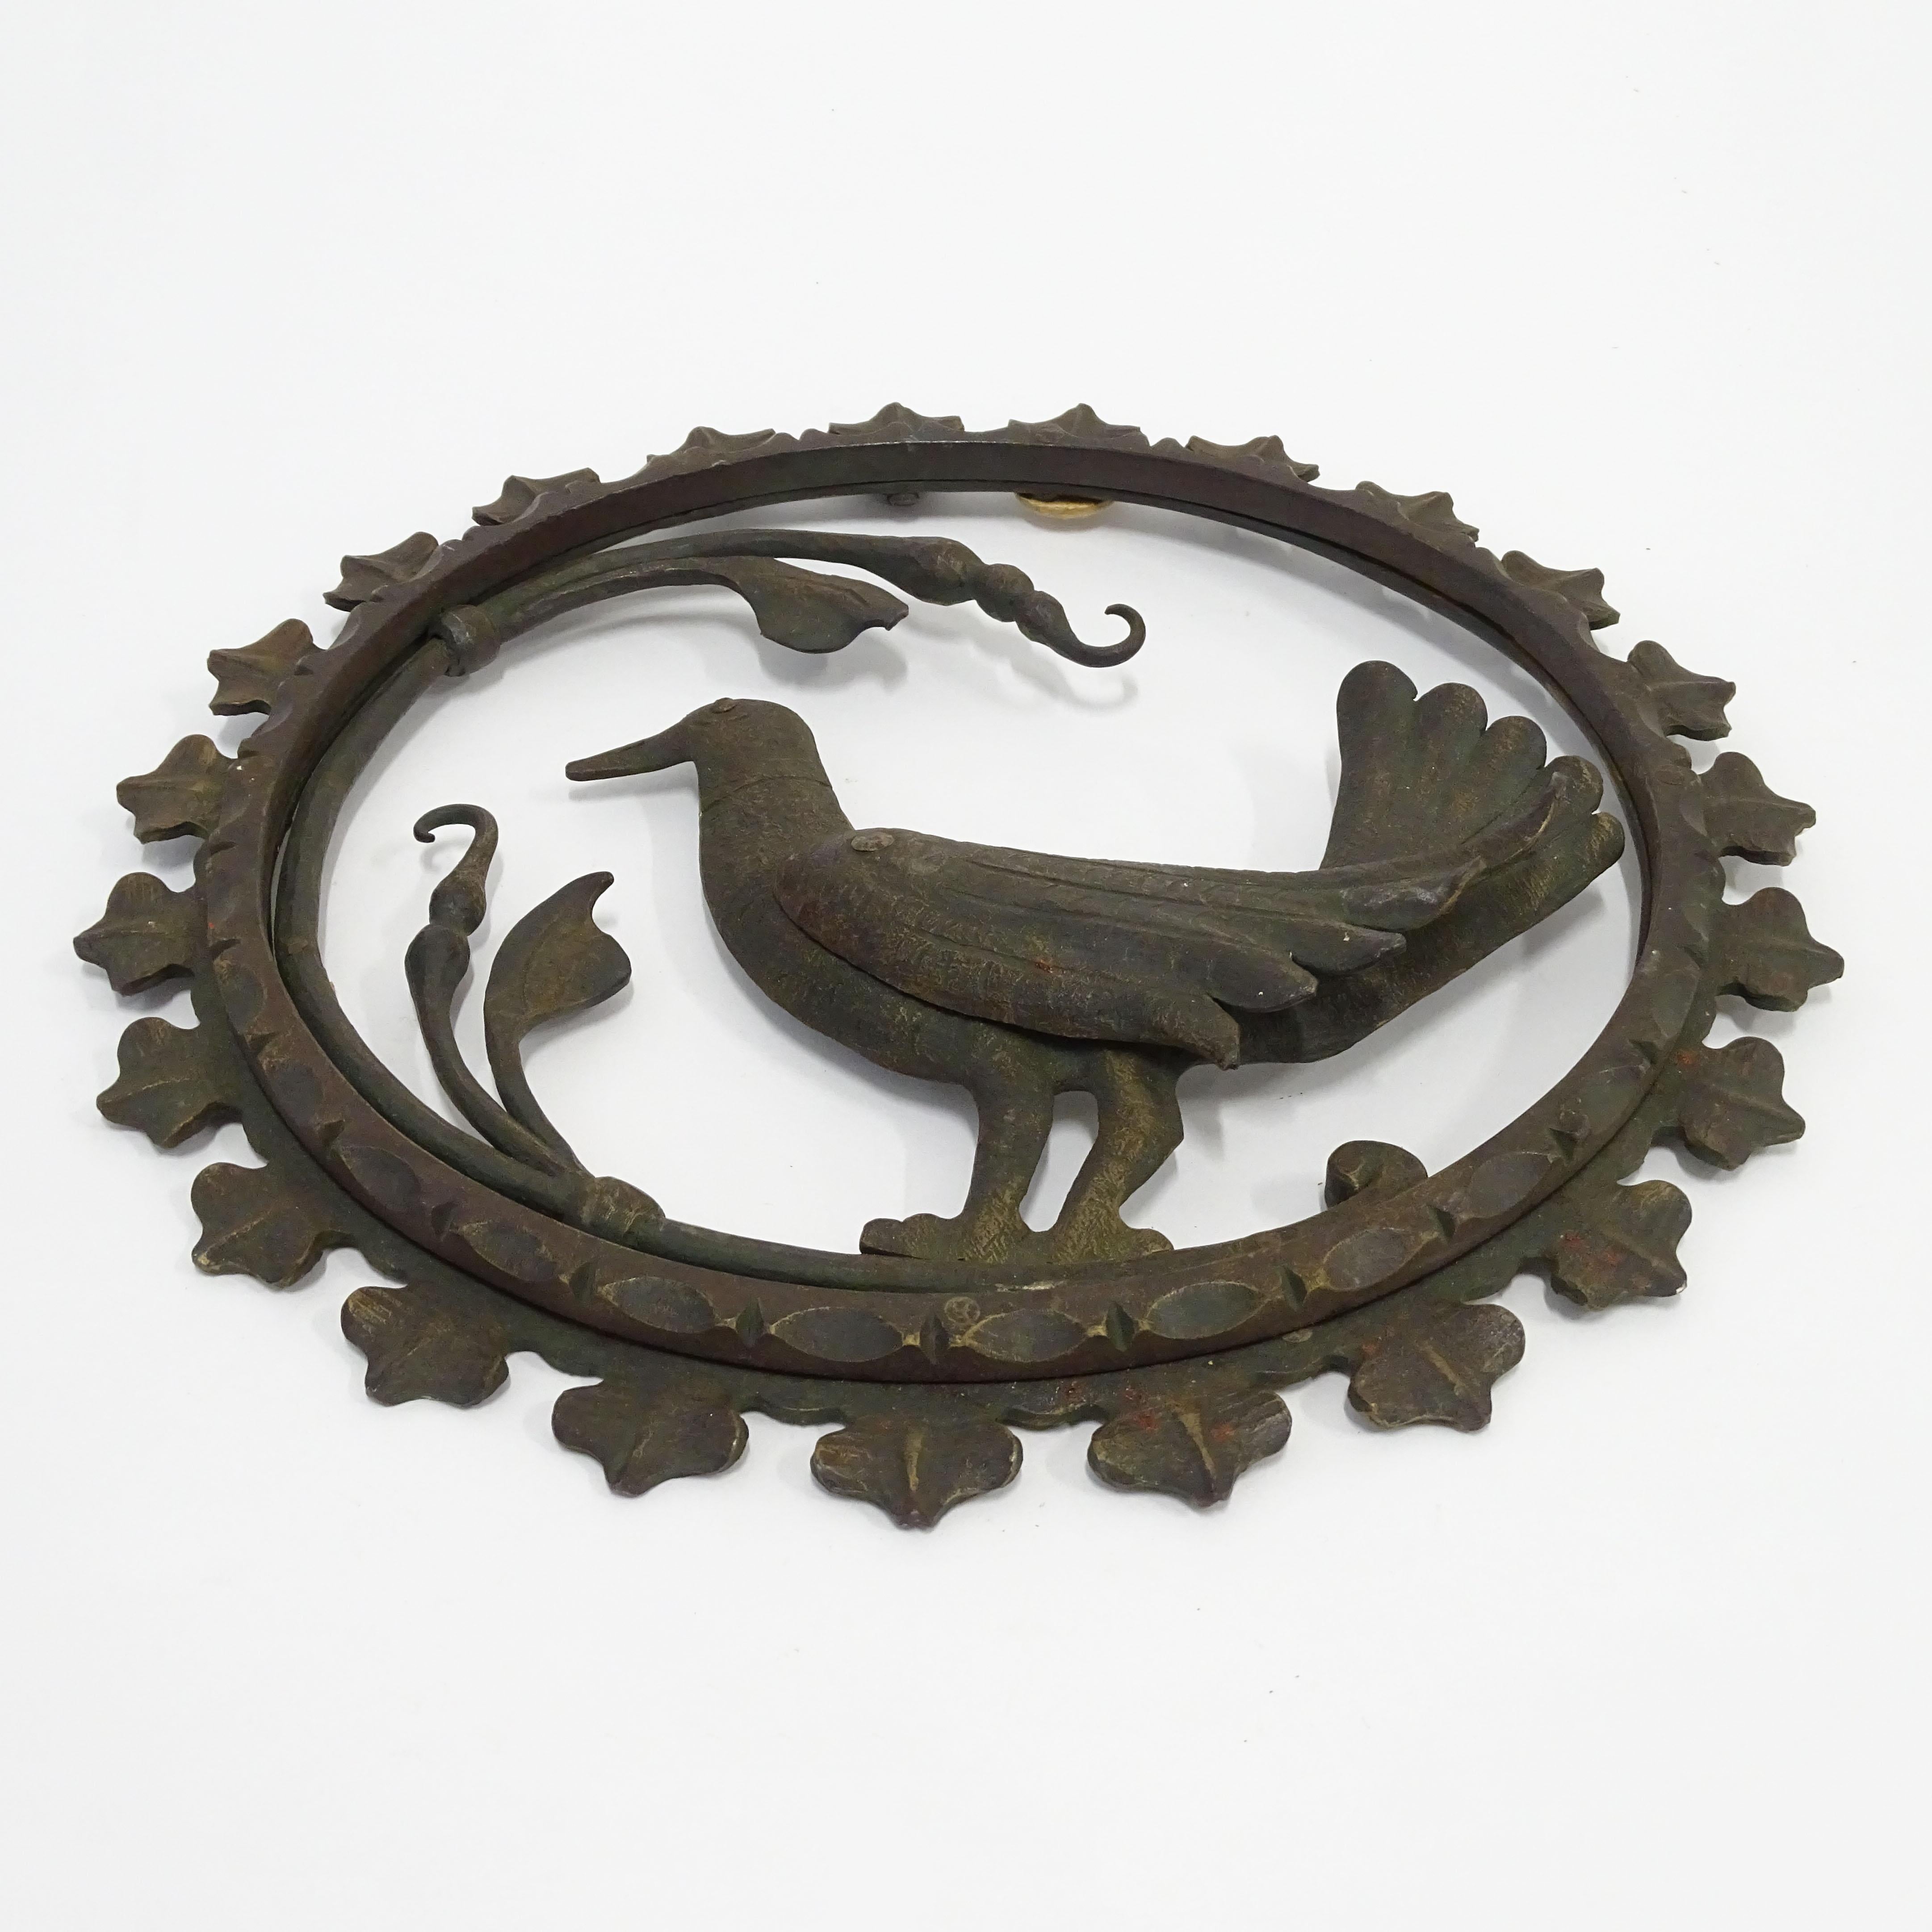 Italian 1930s Wrought Iron Wall Decoration Depicting a Bird  For Sale 2